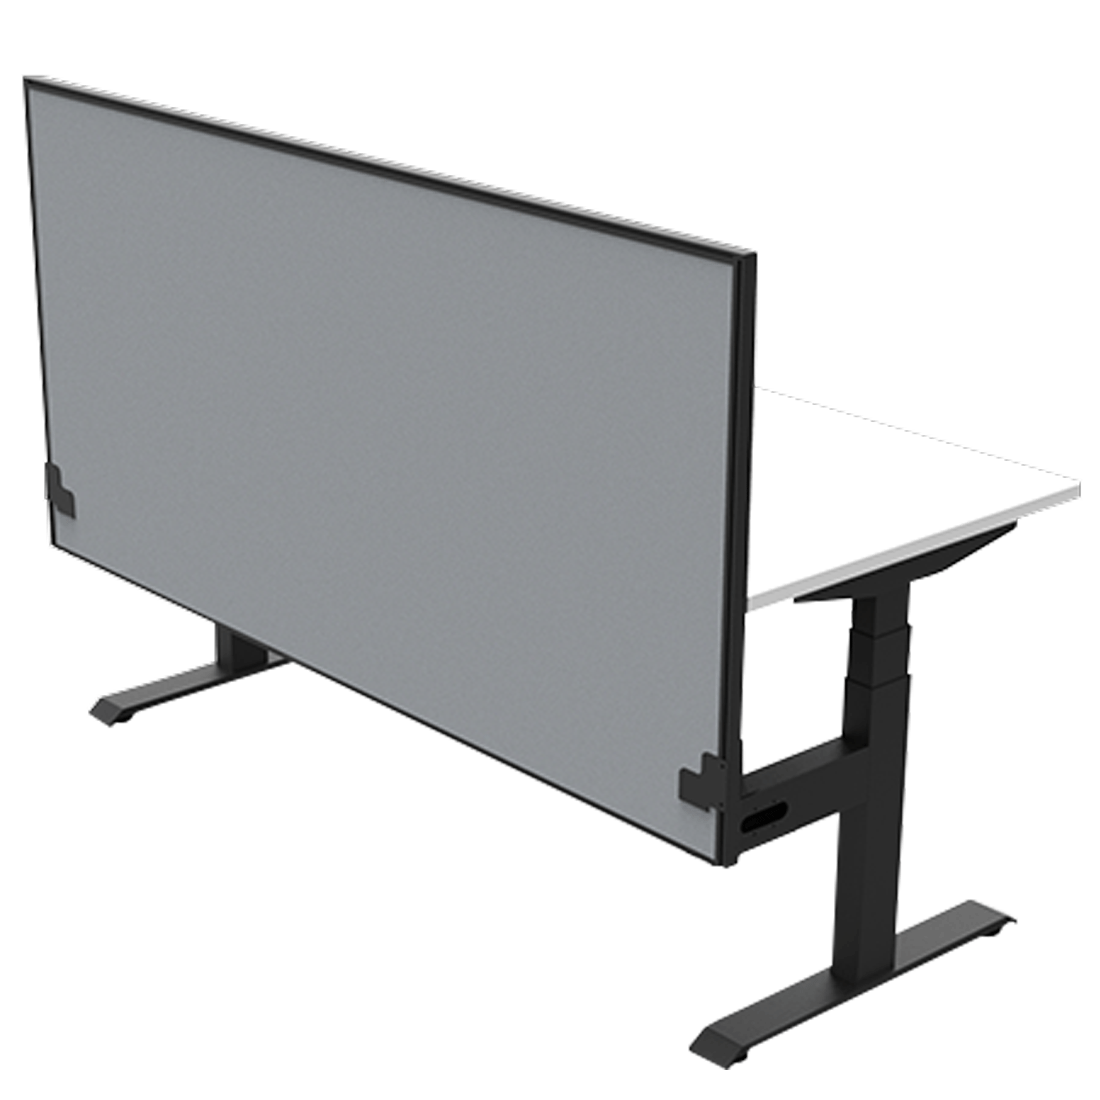 Boost Height Adjustable Desk + Privacy Screen - switchoffice.com.au